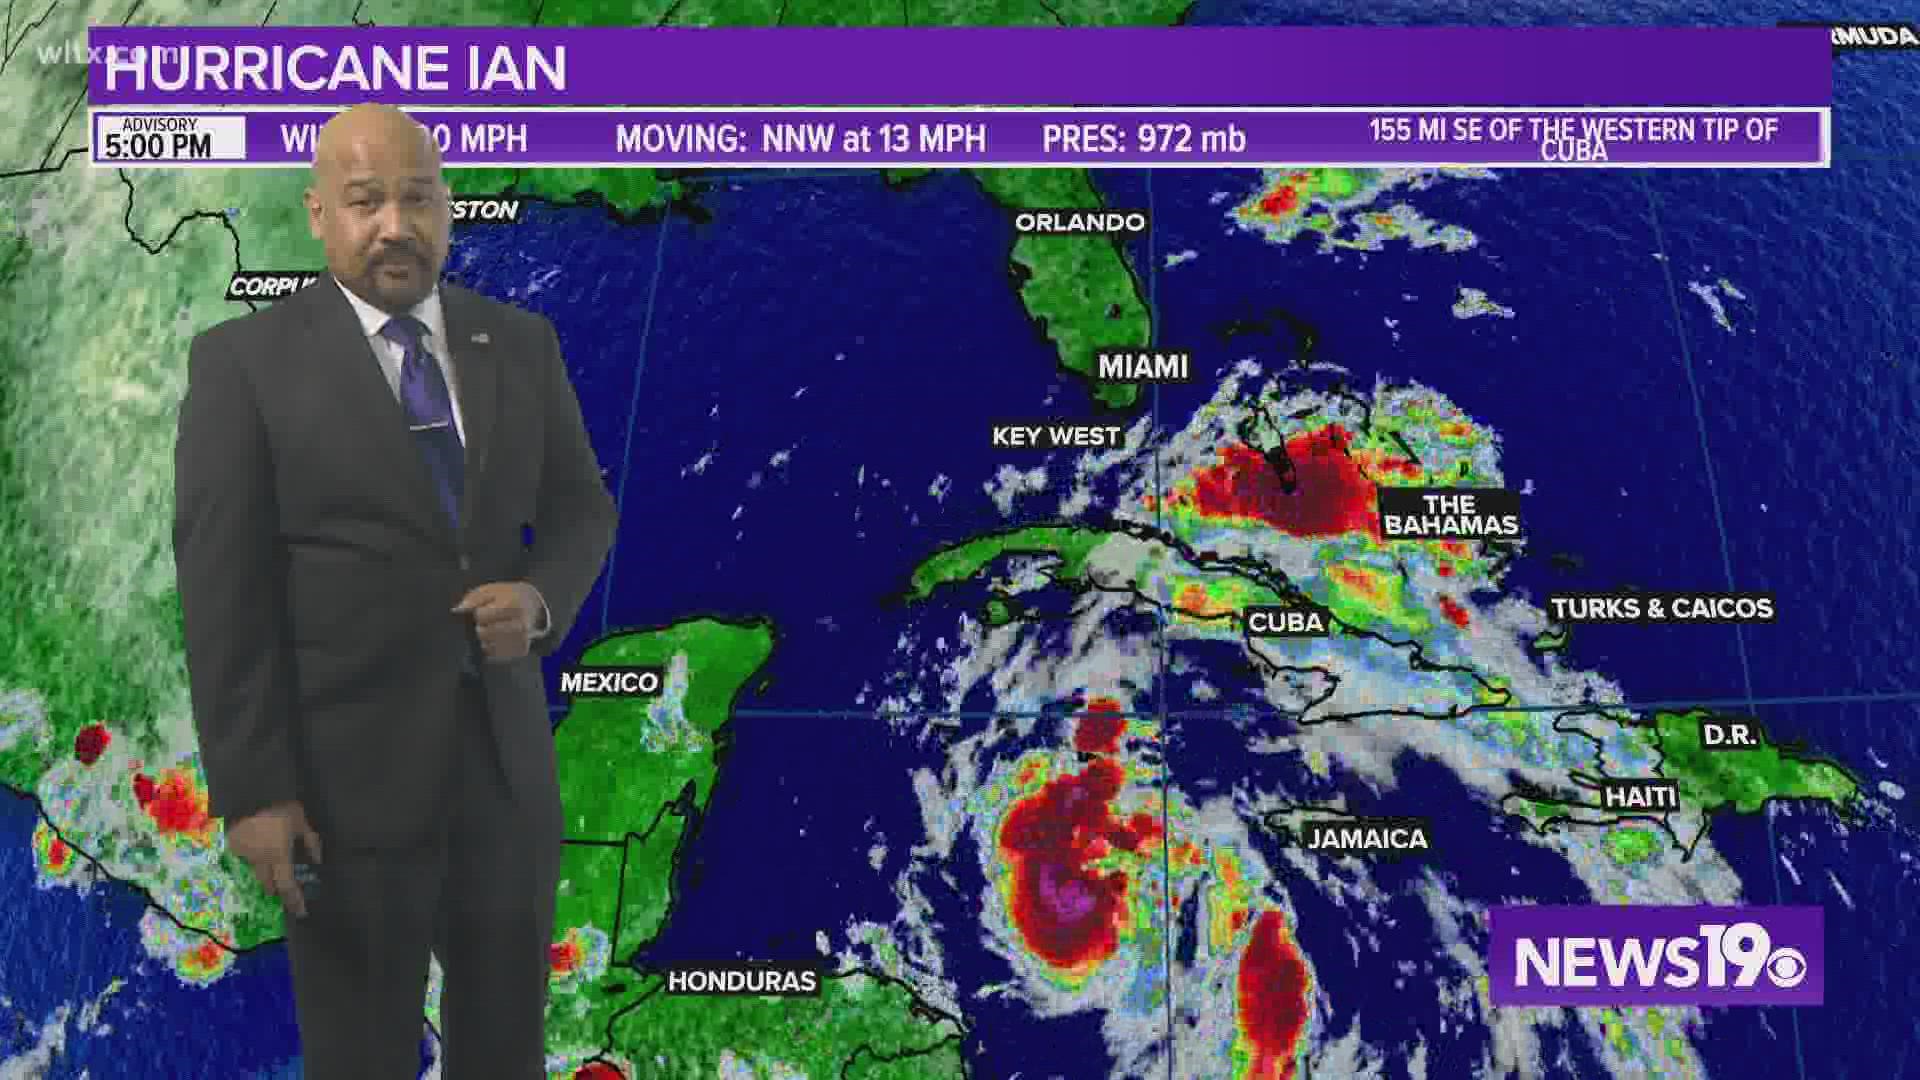 Tracking Hurricane Ian as it heads to Florida and potentially bringing heavy rainfall to The Midlands.